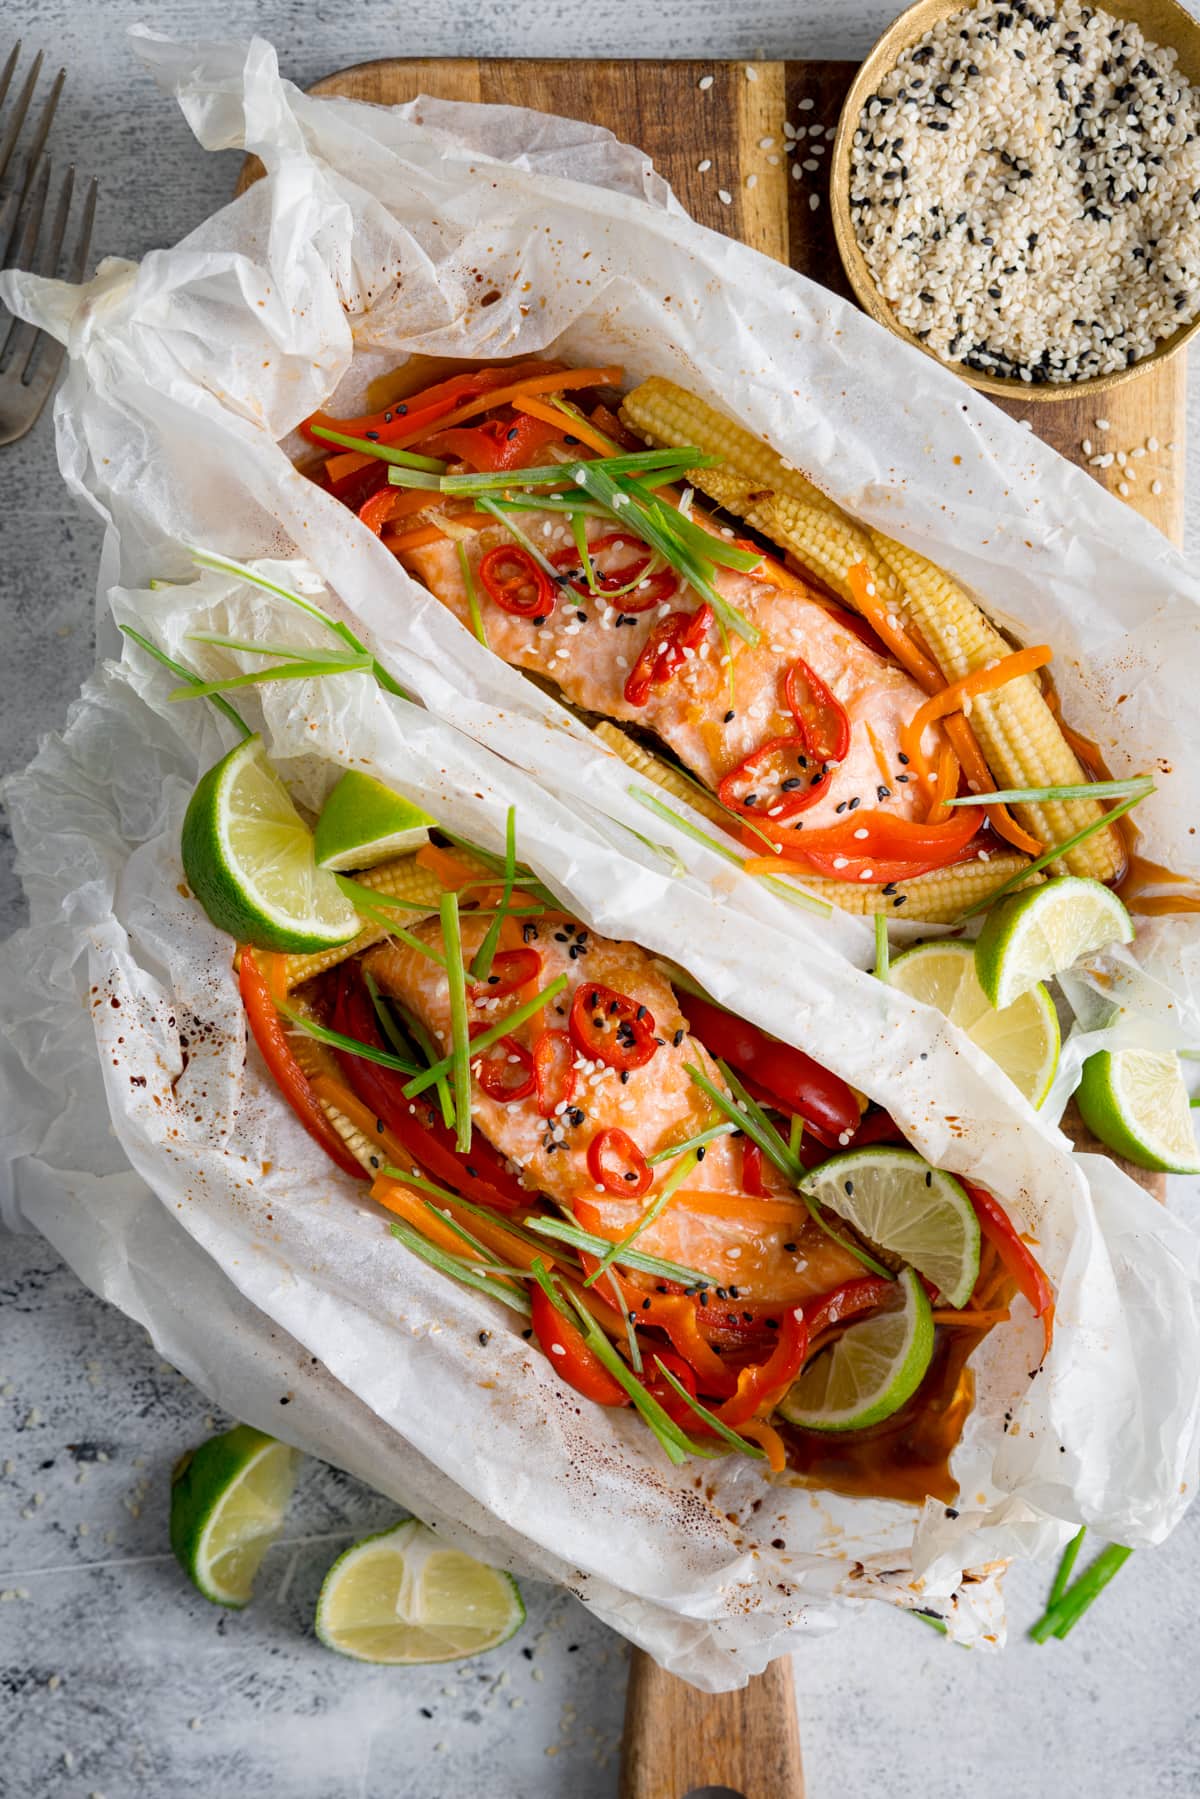 Overhead of two salmon fillets cooked in individual baking parchment parcels with slices of chilli, peppers, babycorn, carrot and spring onion. Also topped with wedges of lime. The parcels are open, on a wooden board on a light background. There is a dish of sesame seeds and some lime wedges nearby.